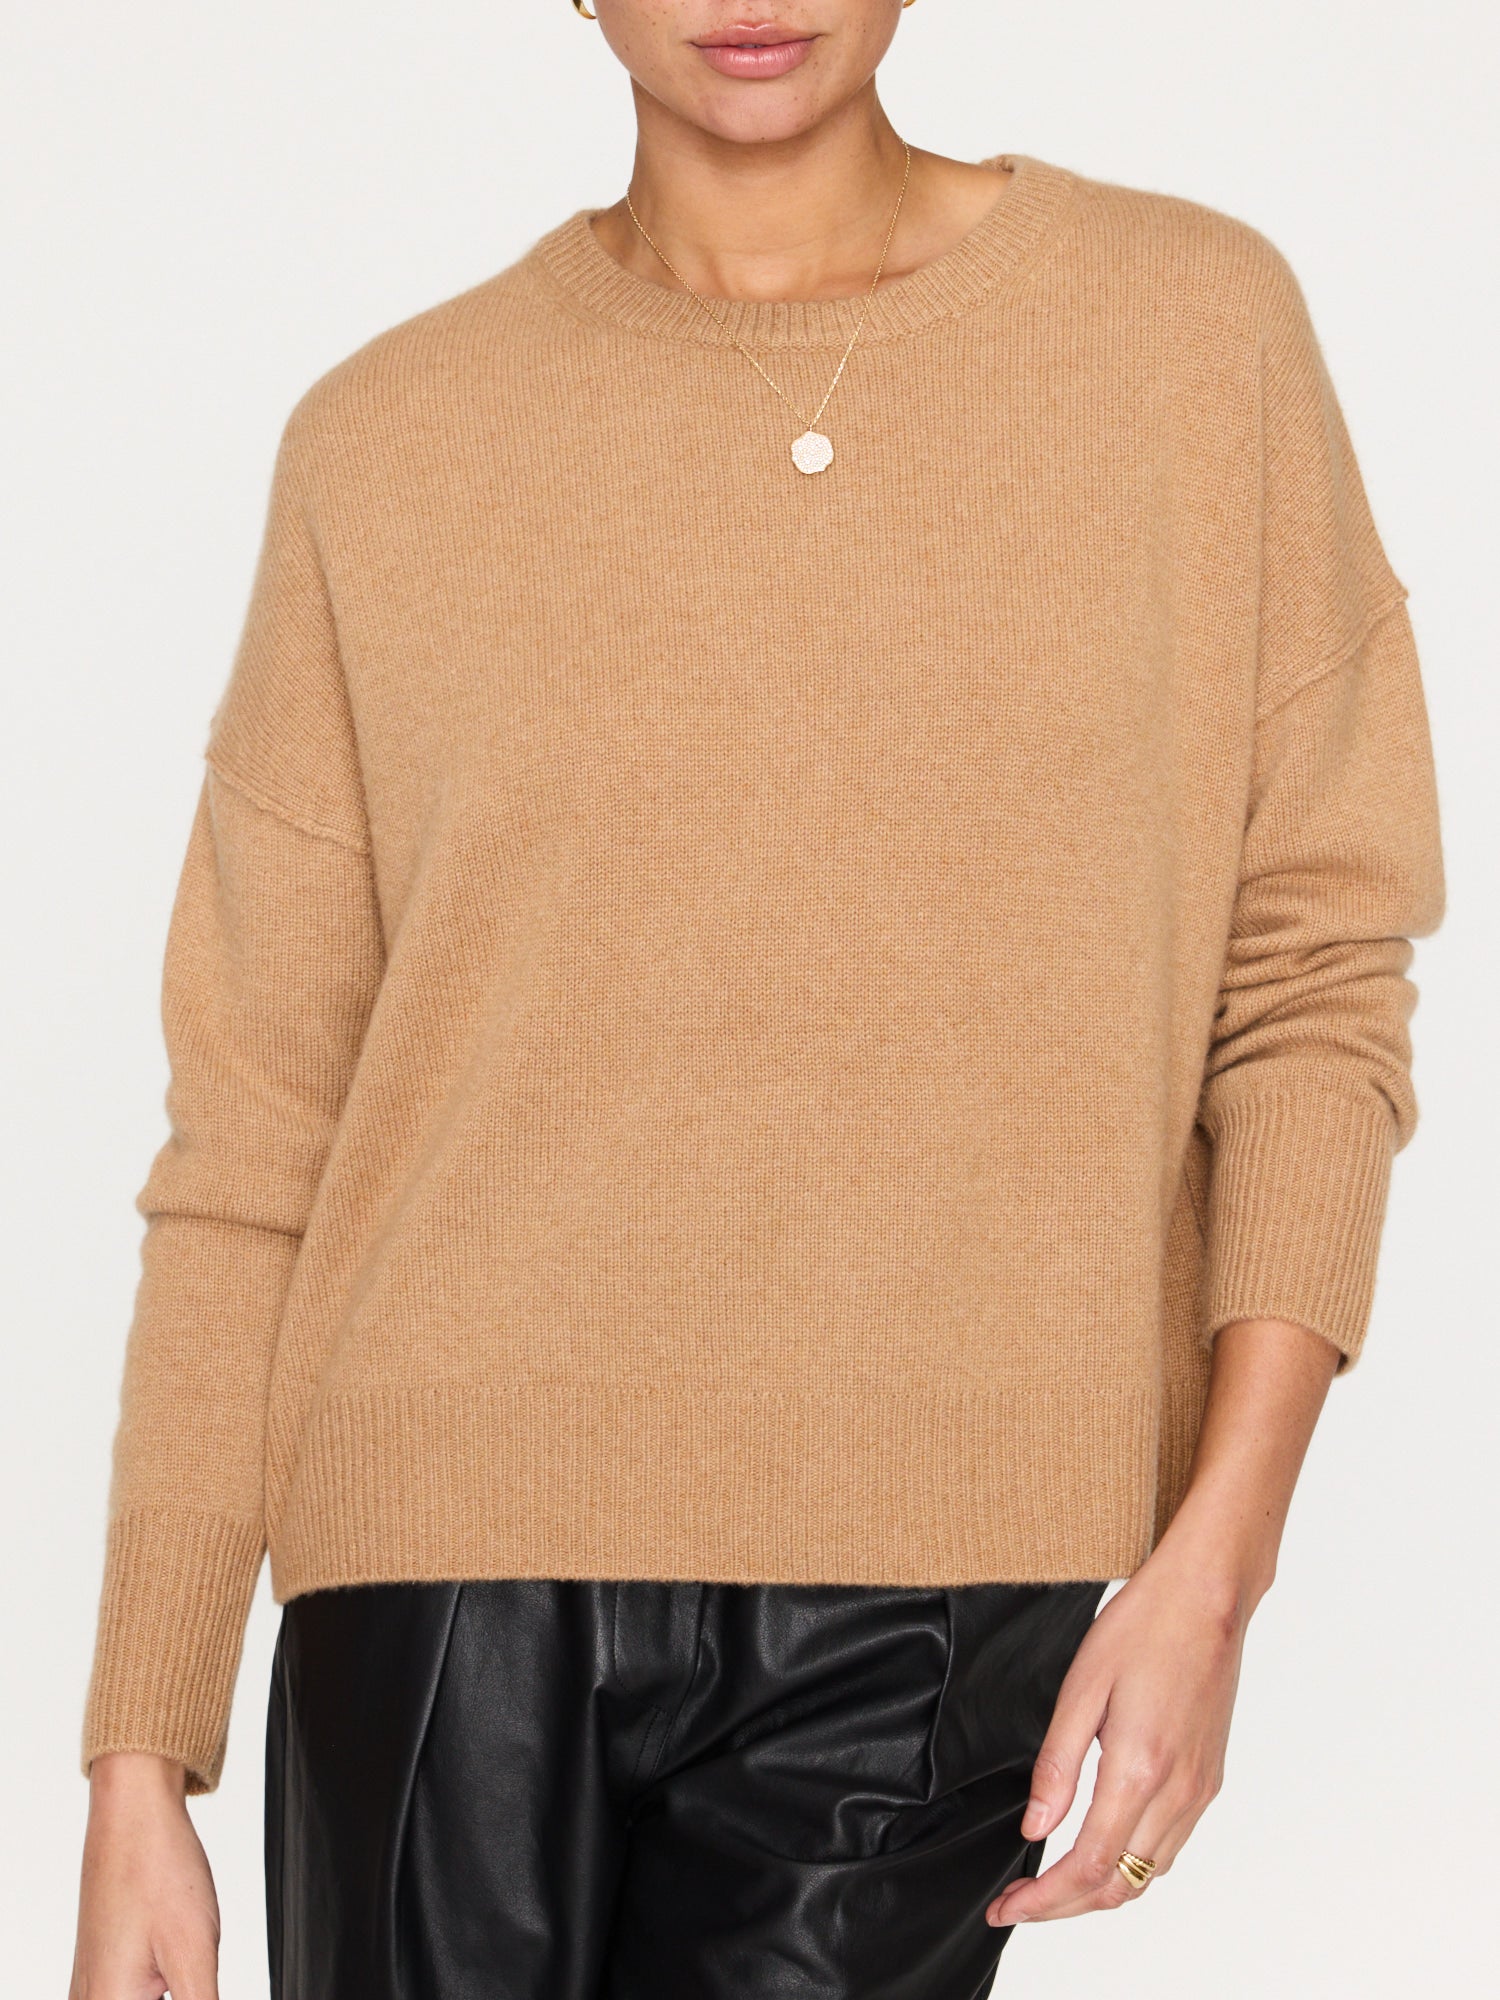 Everyday cashmere crewneck tan sweater front view 2